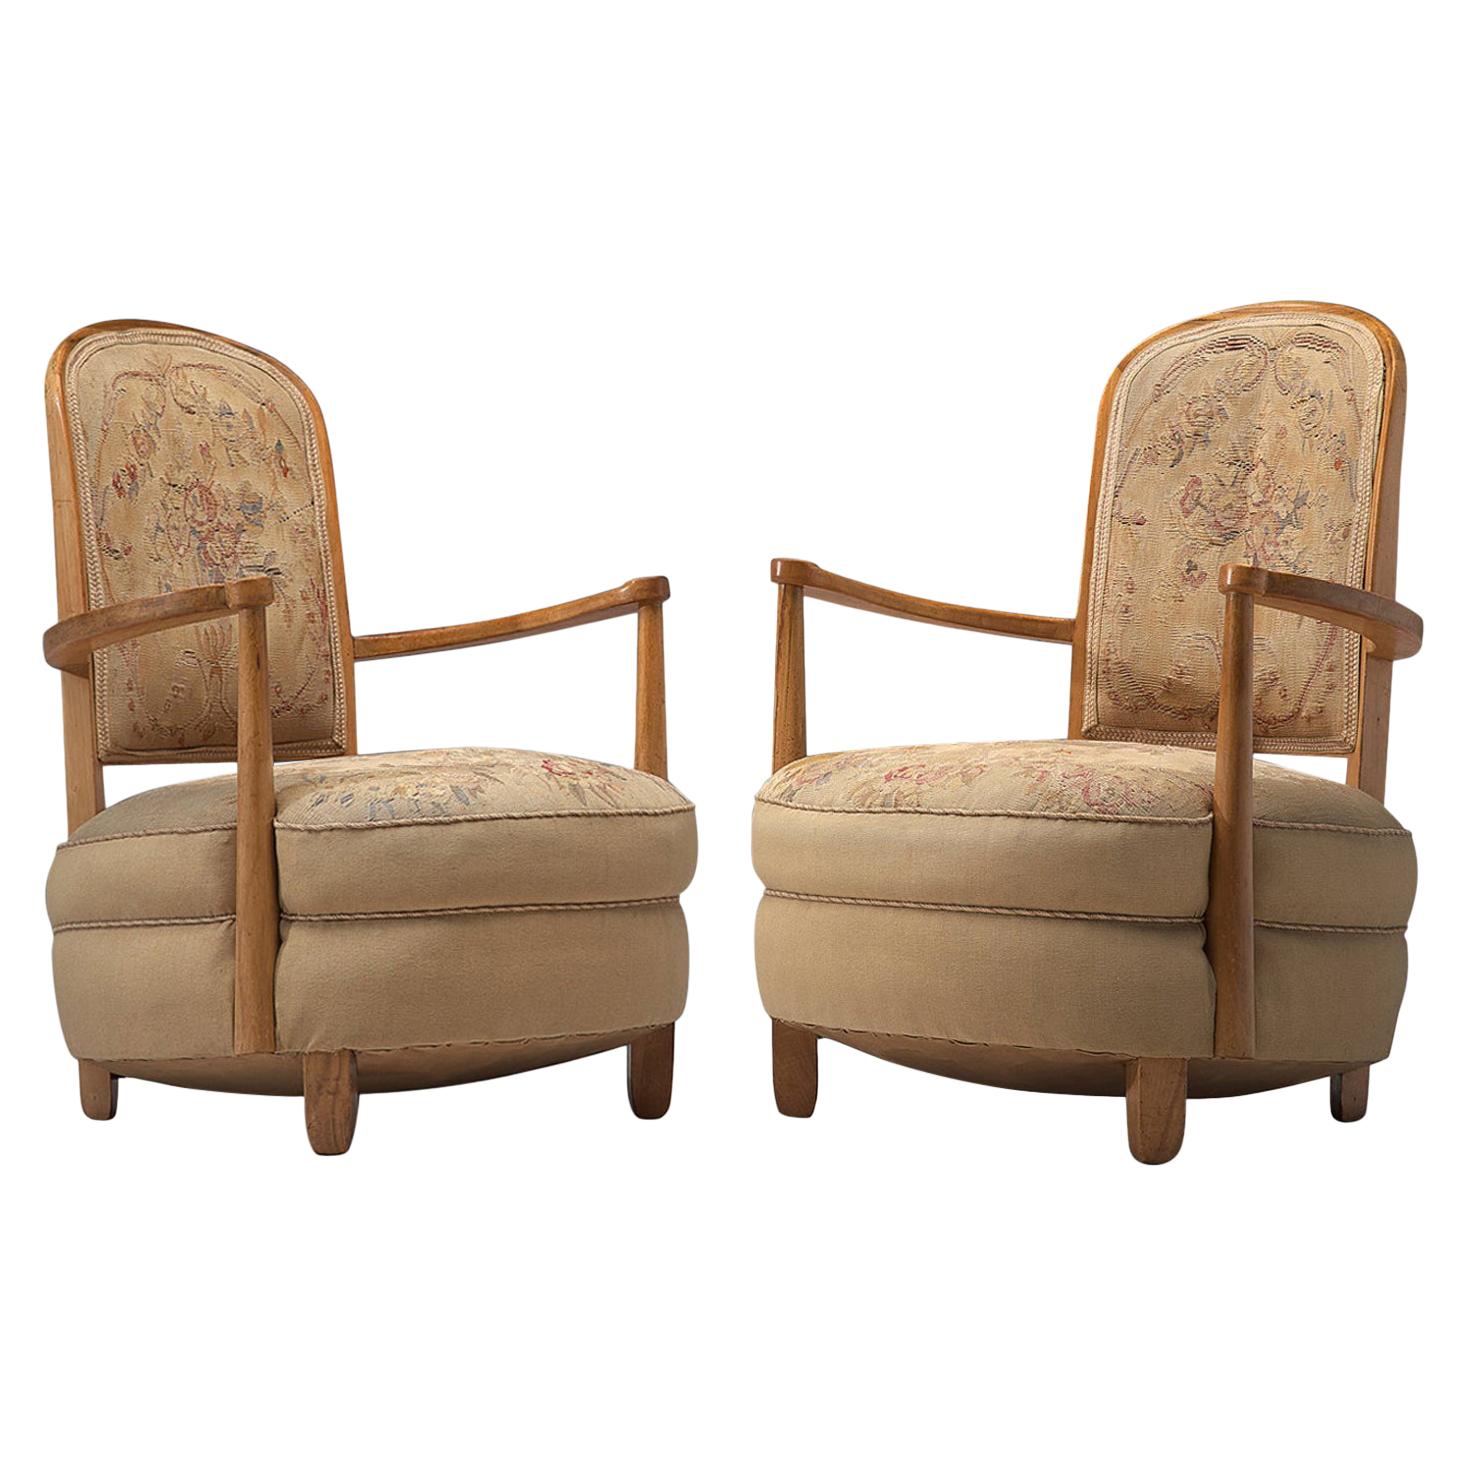 Pair of Elegant Art Deco Armchairs with Original Floral Upholstery